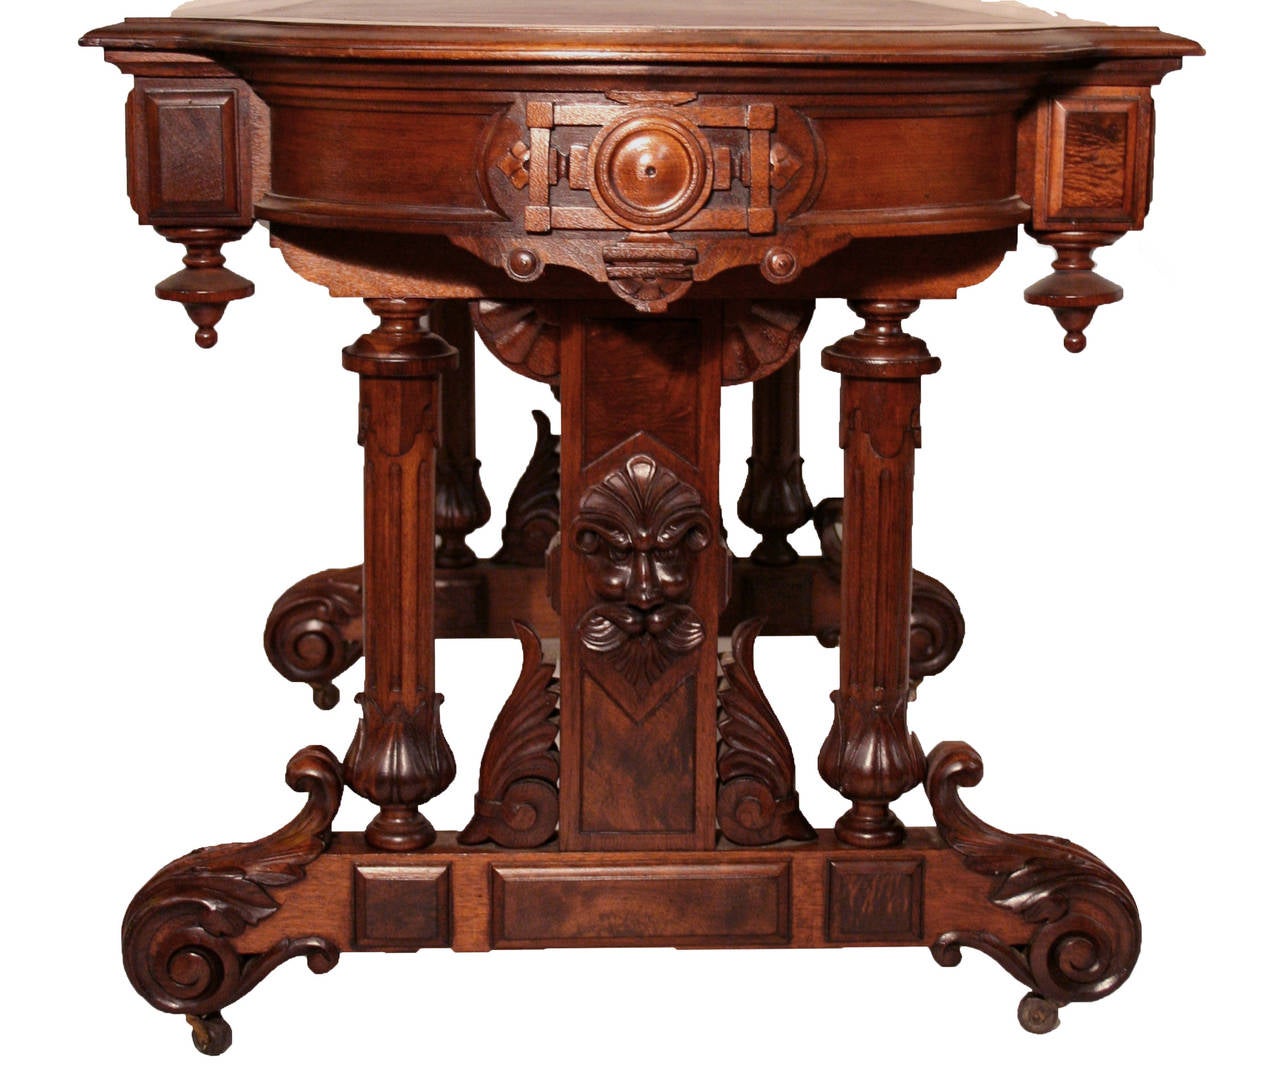 From the Estate of James C. Flood, Lindenwood Mansion 1860s, an American Renaissance Revival table and desk in original solid walnut wood, professionally refinished and inlaid fine new leather top with leather foot rest. Size 40